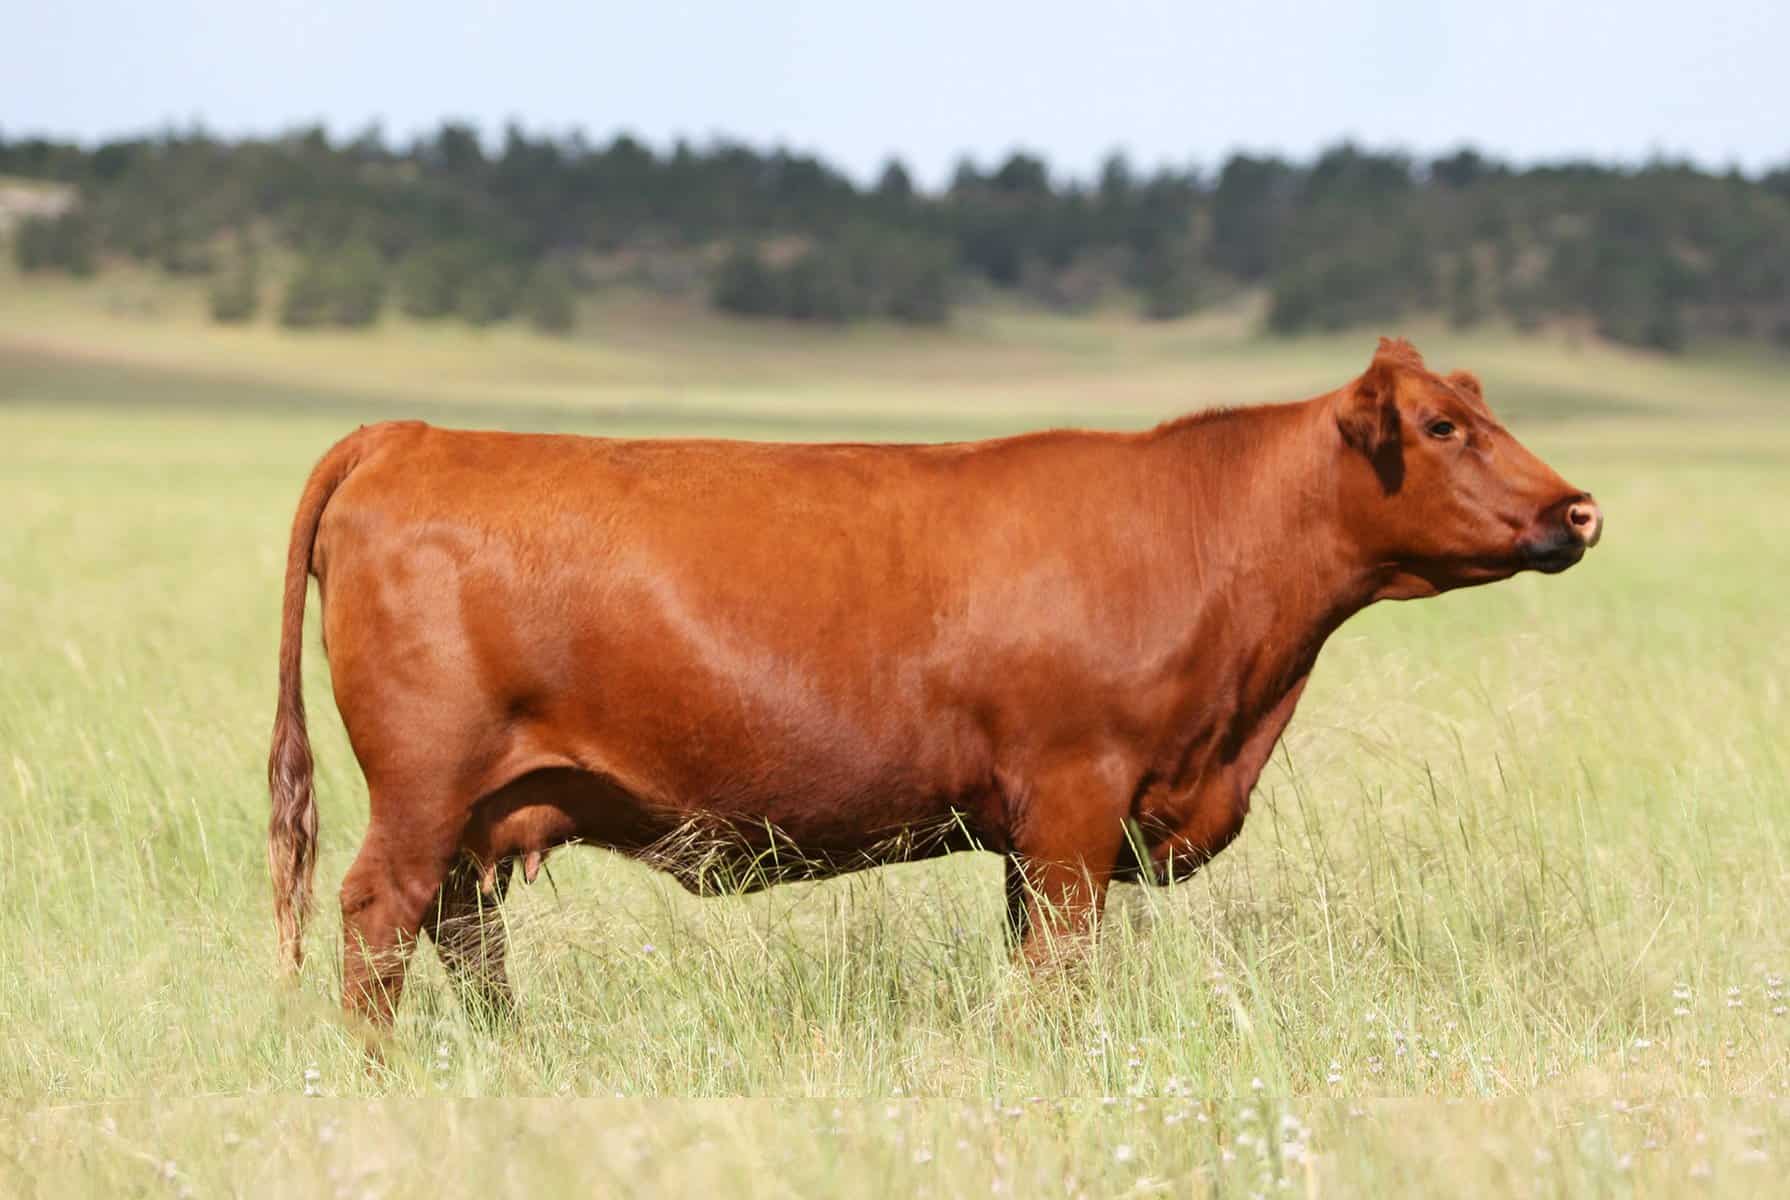 Red Angus cow